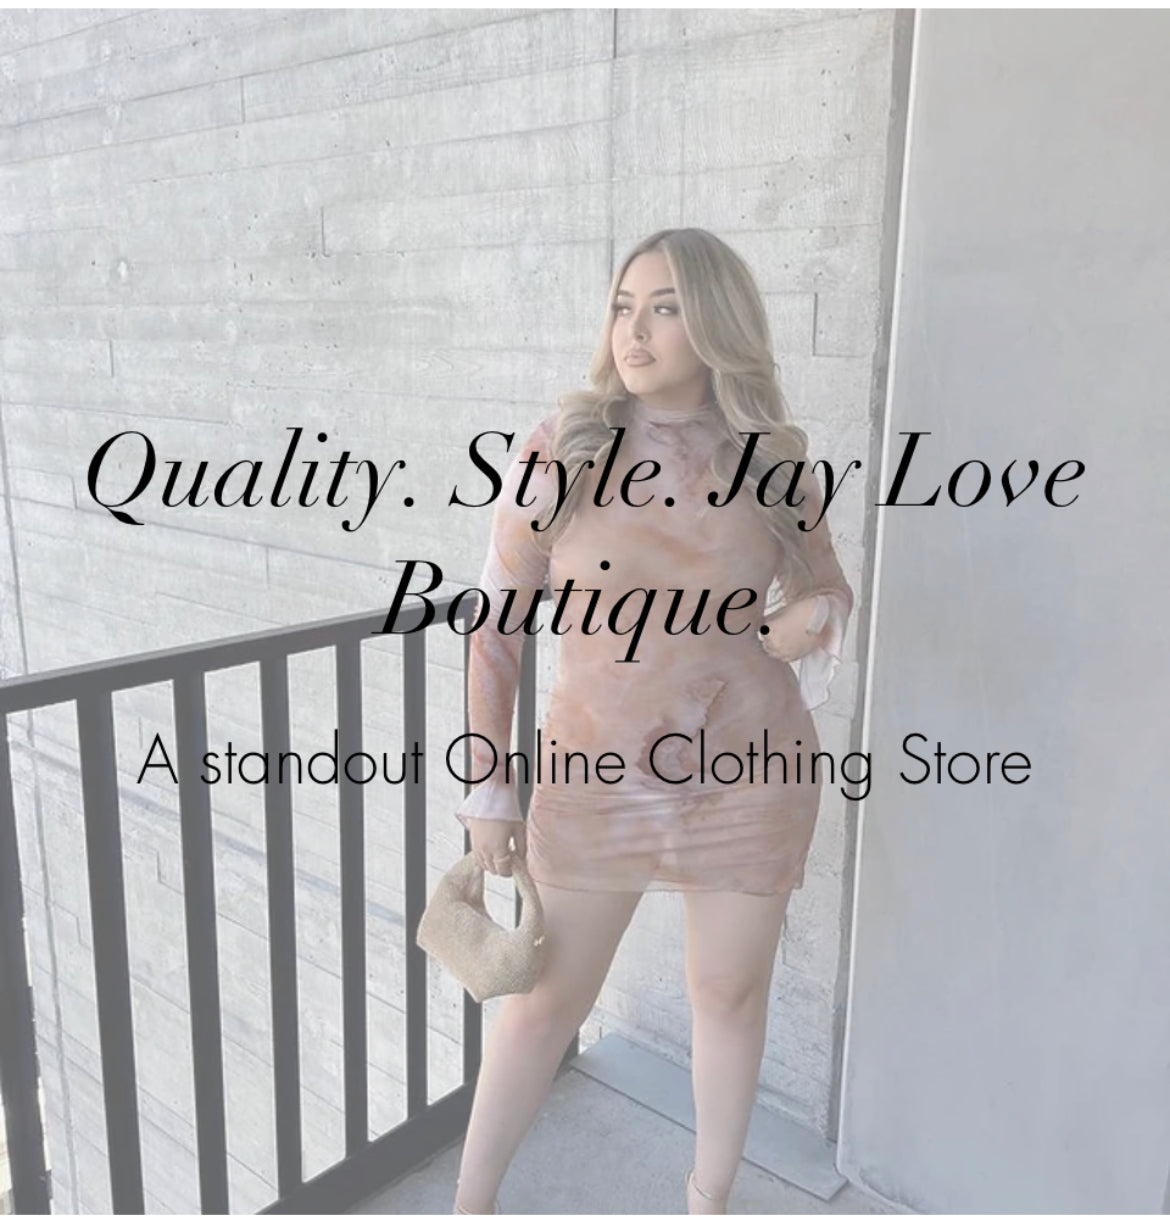 Jay's Boutique 